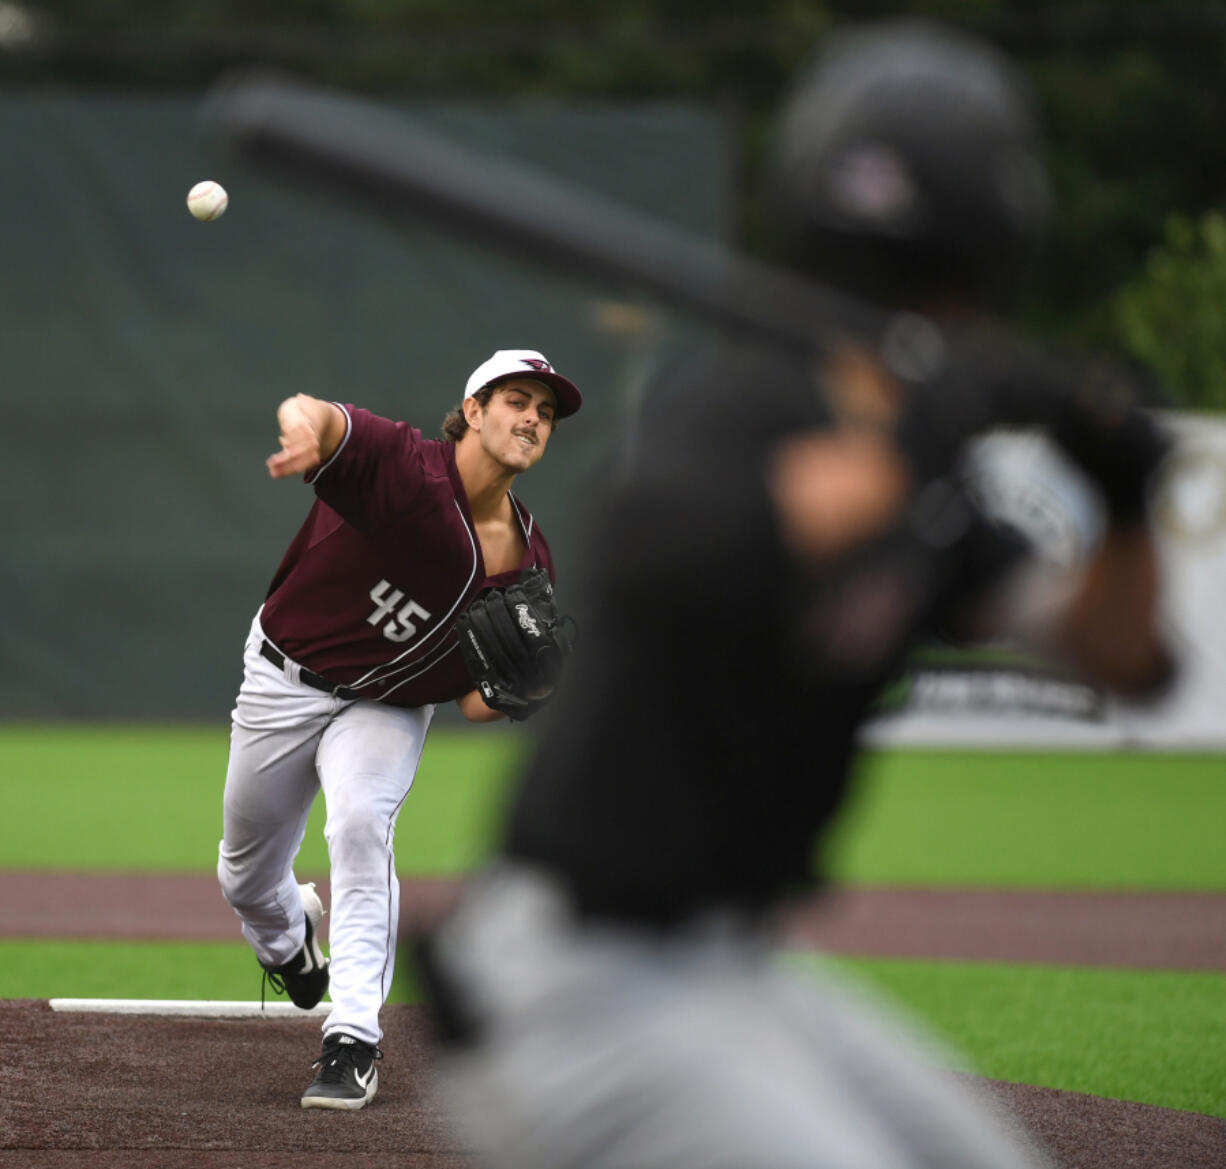 Raptors pitcher Cooper Rons throws the ball Wednesday, July 6, 2022, during a game between the Ridgefield Raptors and the Corvallis Knights at the Ridgefield Outdoor Recreation Complex.